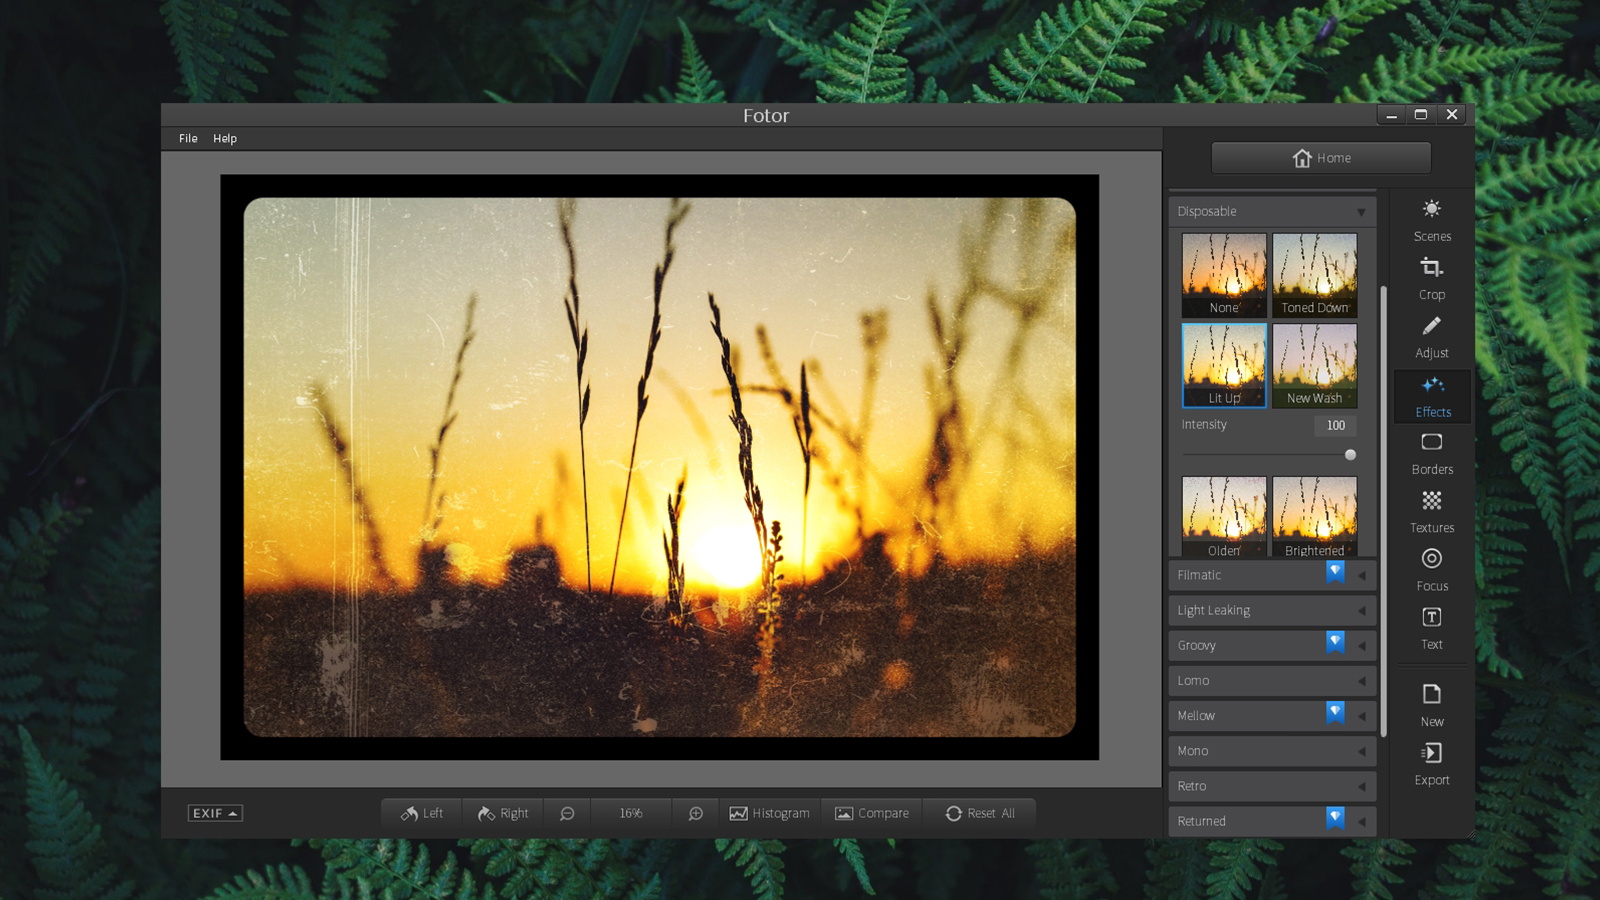 Fotor Review: Online Photo Editor with HDR Support & More